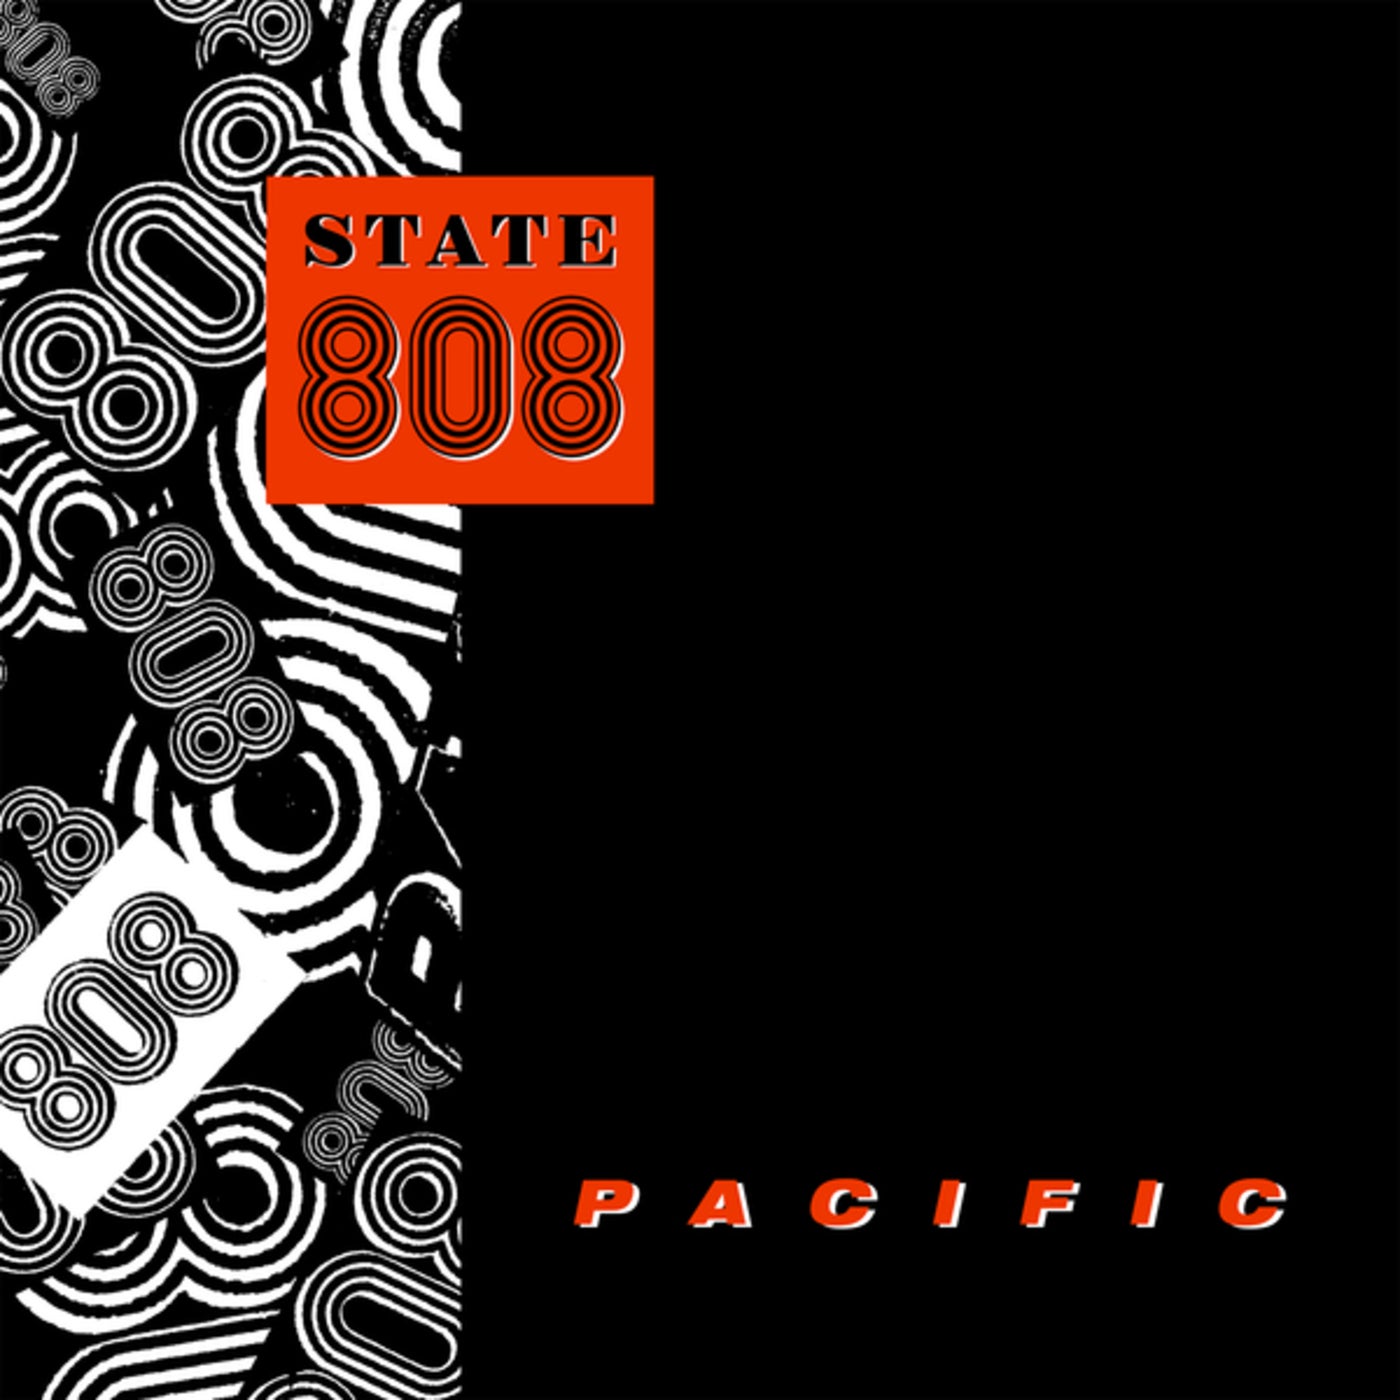 Pacific by 808 State, Eric Kupper, Justin Strauss and Musto 